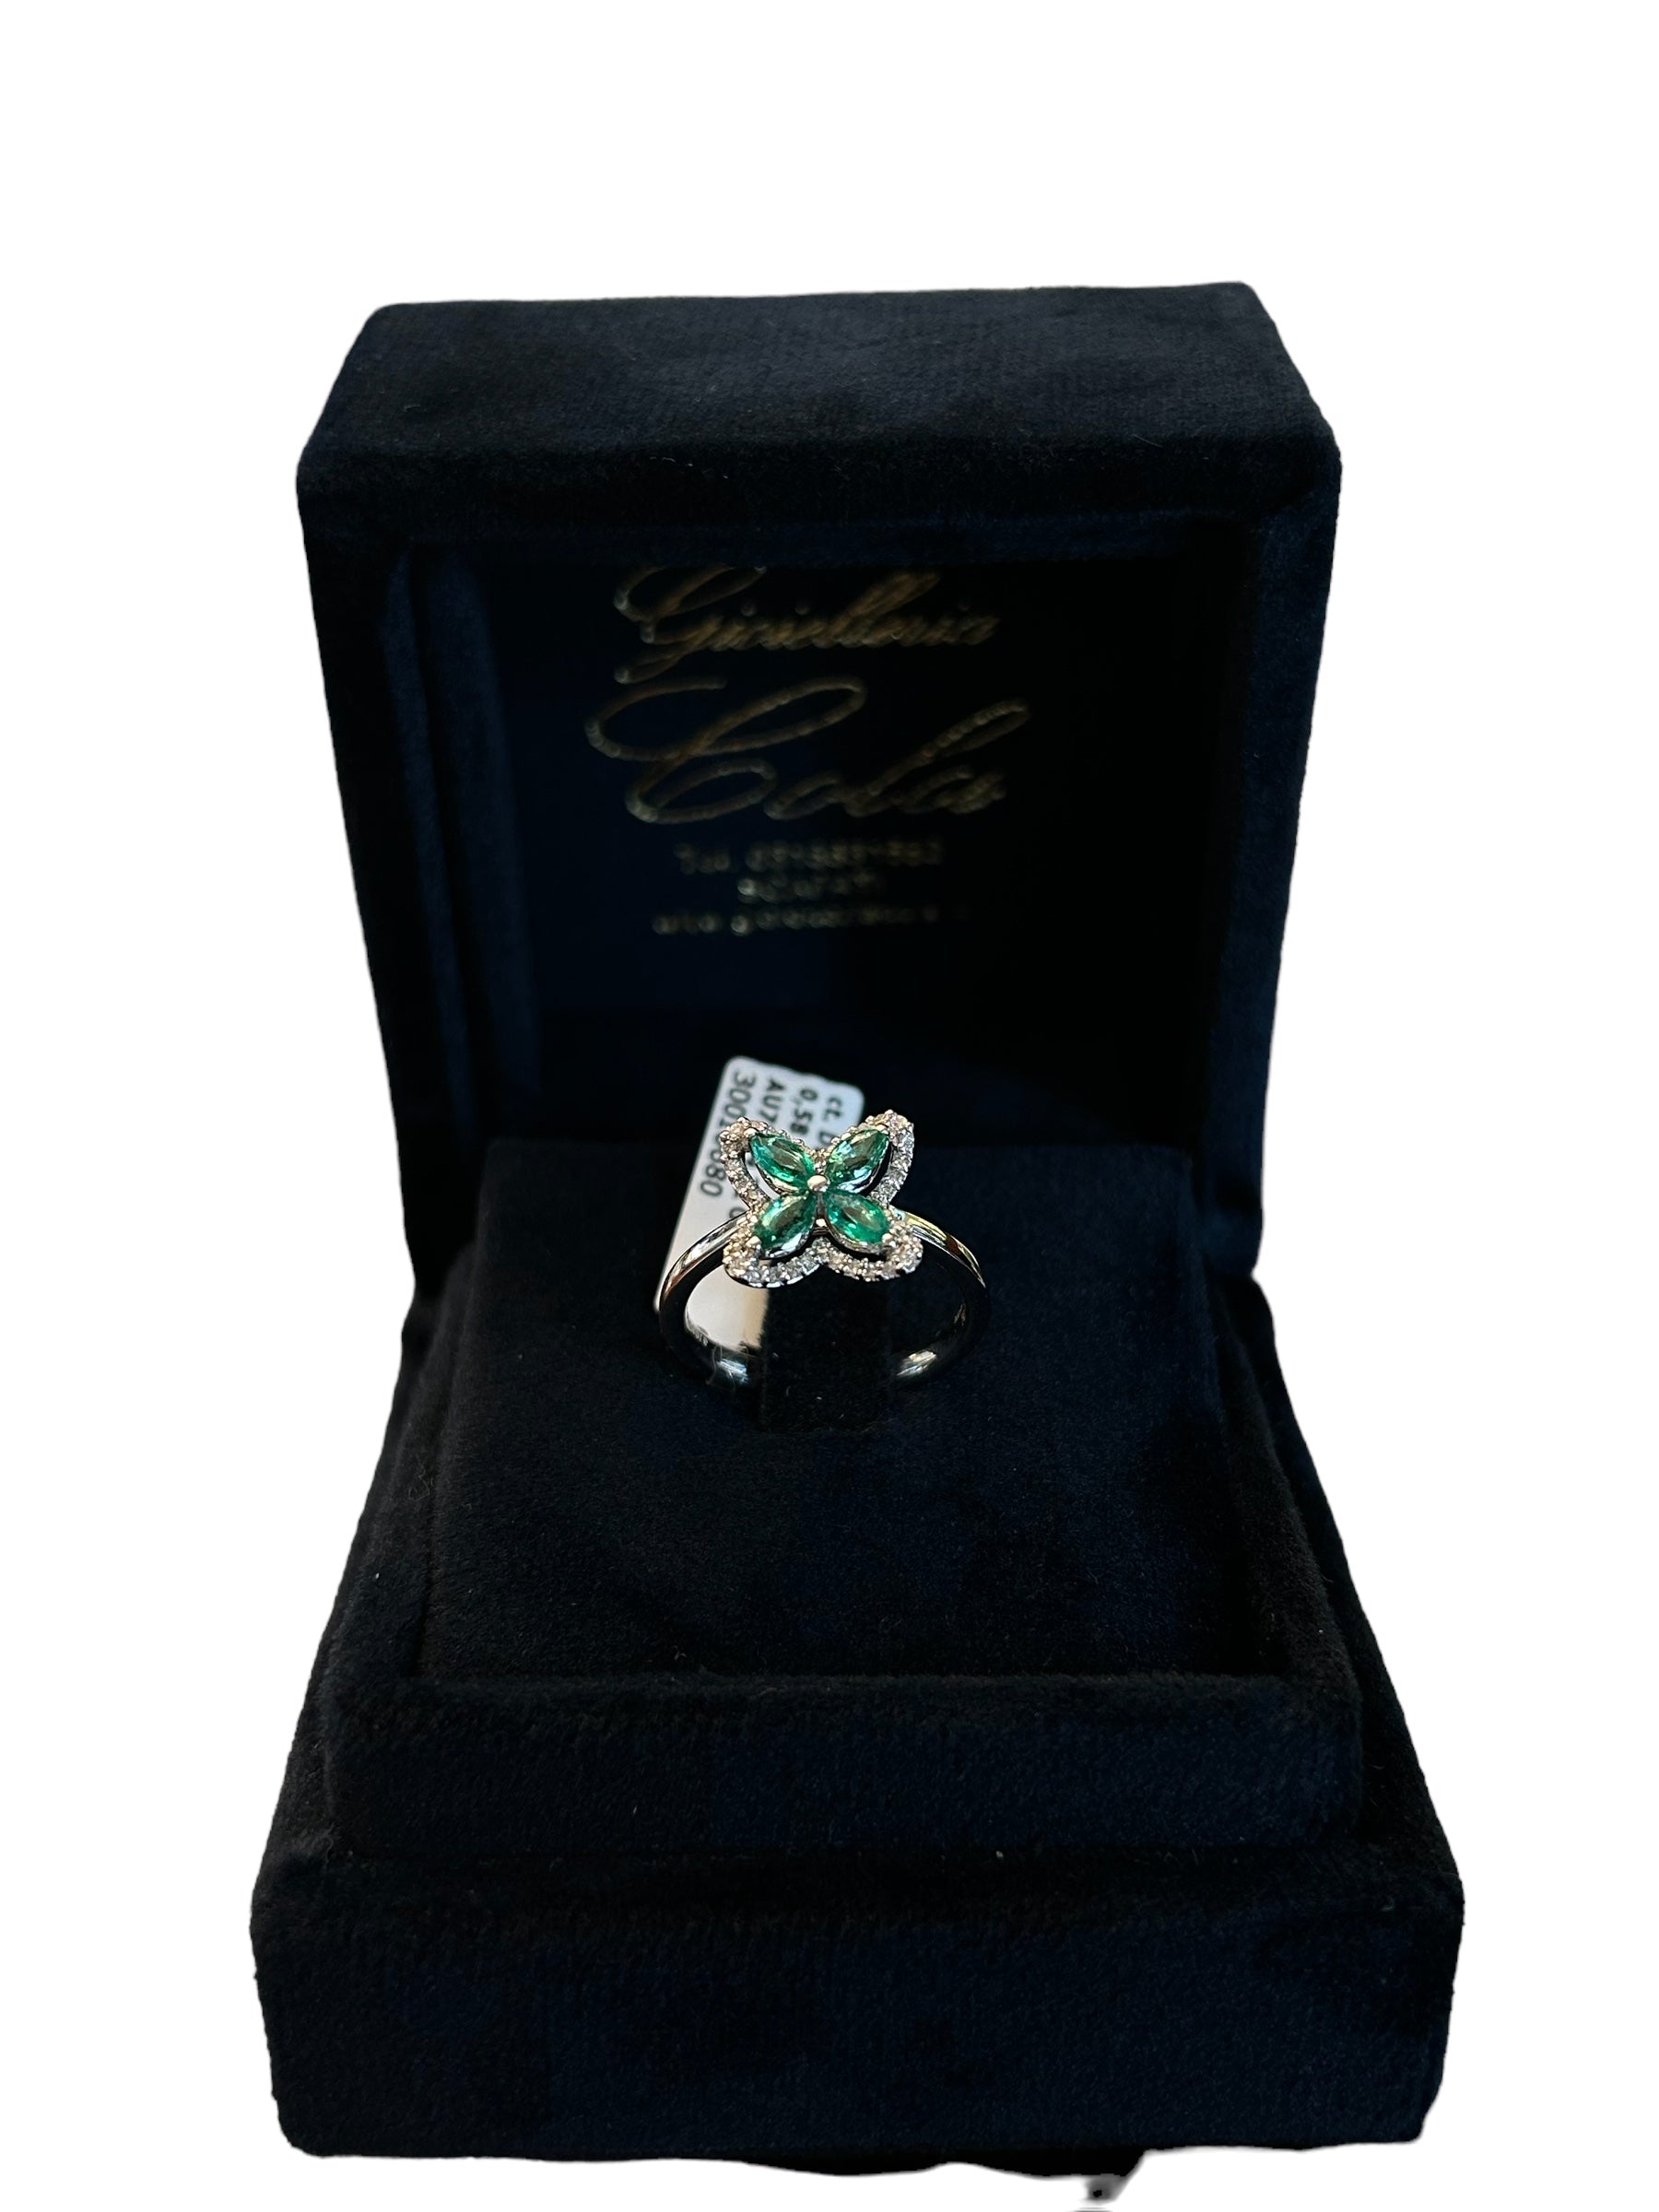 FIORE ring in white gold and diamond ring with emerald, 0.58 carats of emeralds - 1395A03MW